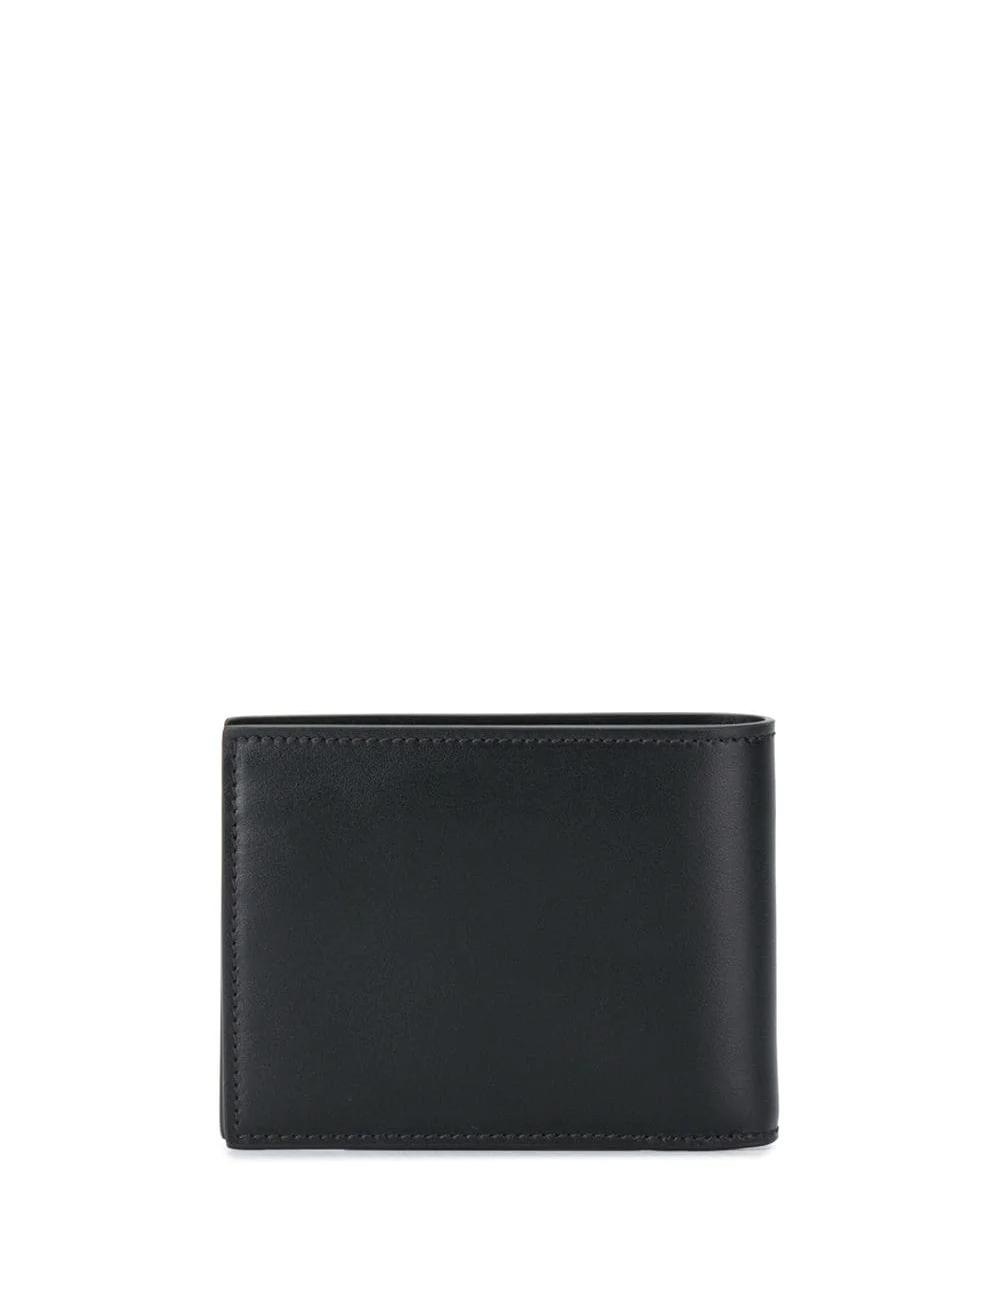 Genuine leather wallet credit card bifold 